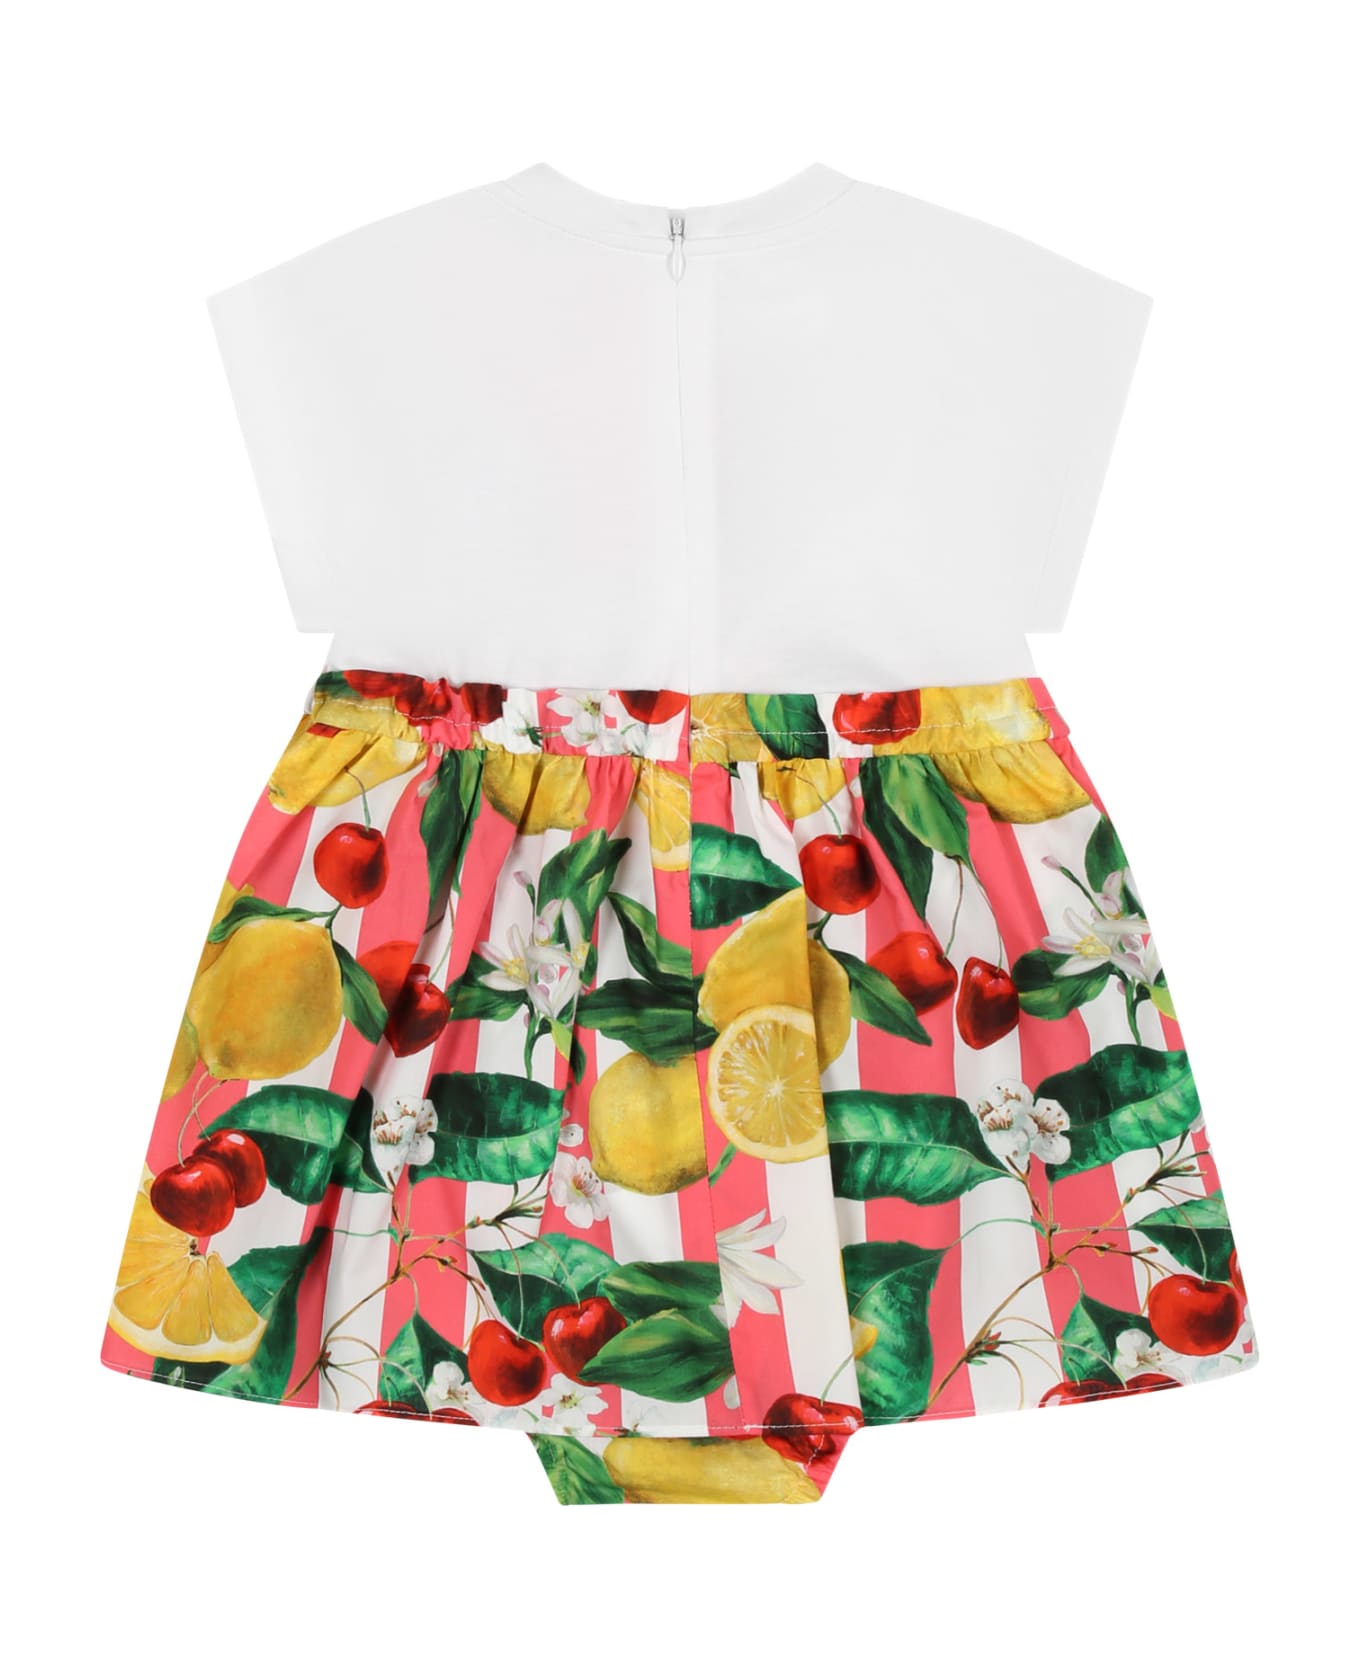 Dolce & Gabbana White Dress For Baby Girl With All-over Multicolor Fruits And Flowers - Multicolore ワンピース＆ドレス